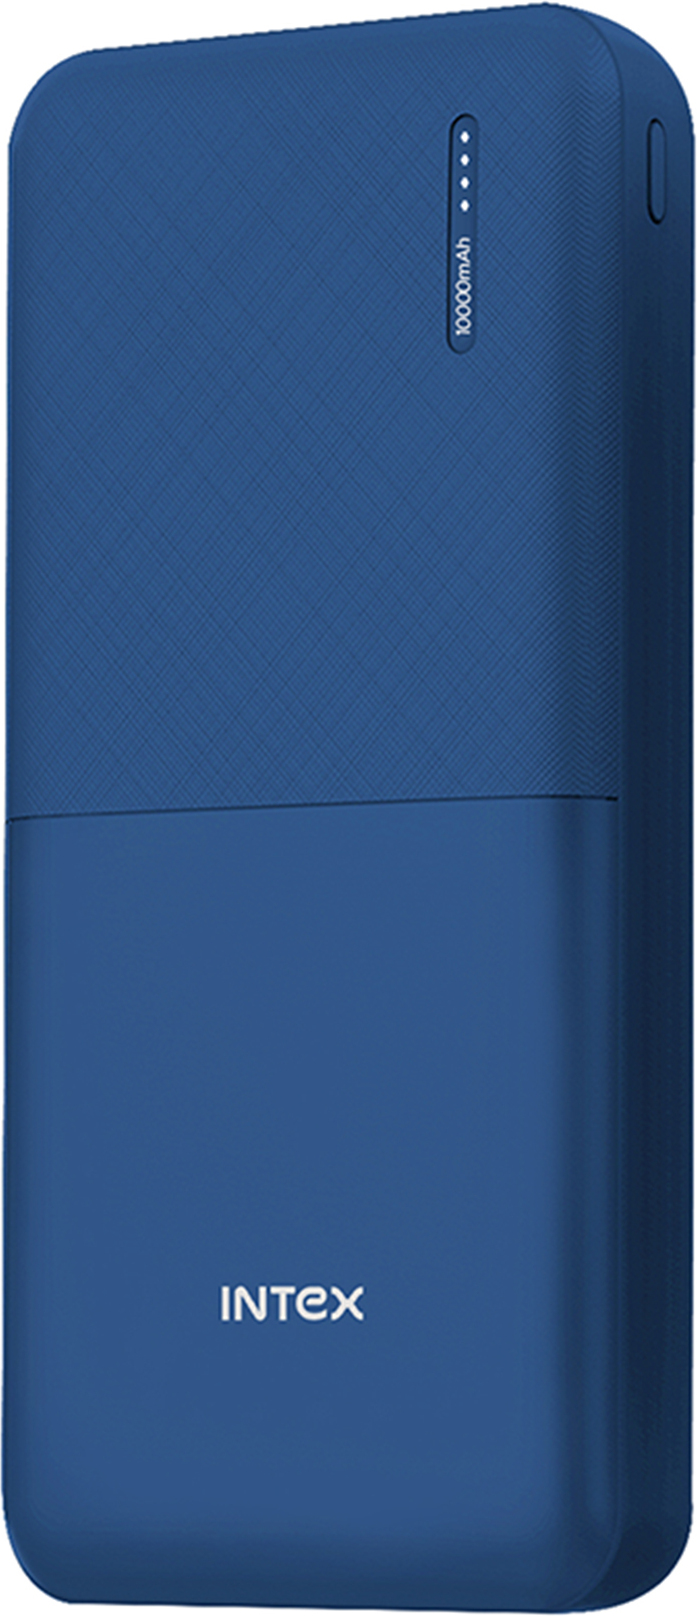 Intex 10000 mAh 12 W Power Bank (Navy Blue, Lithium Polymer, Fast Charging for Mobile)